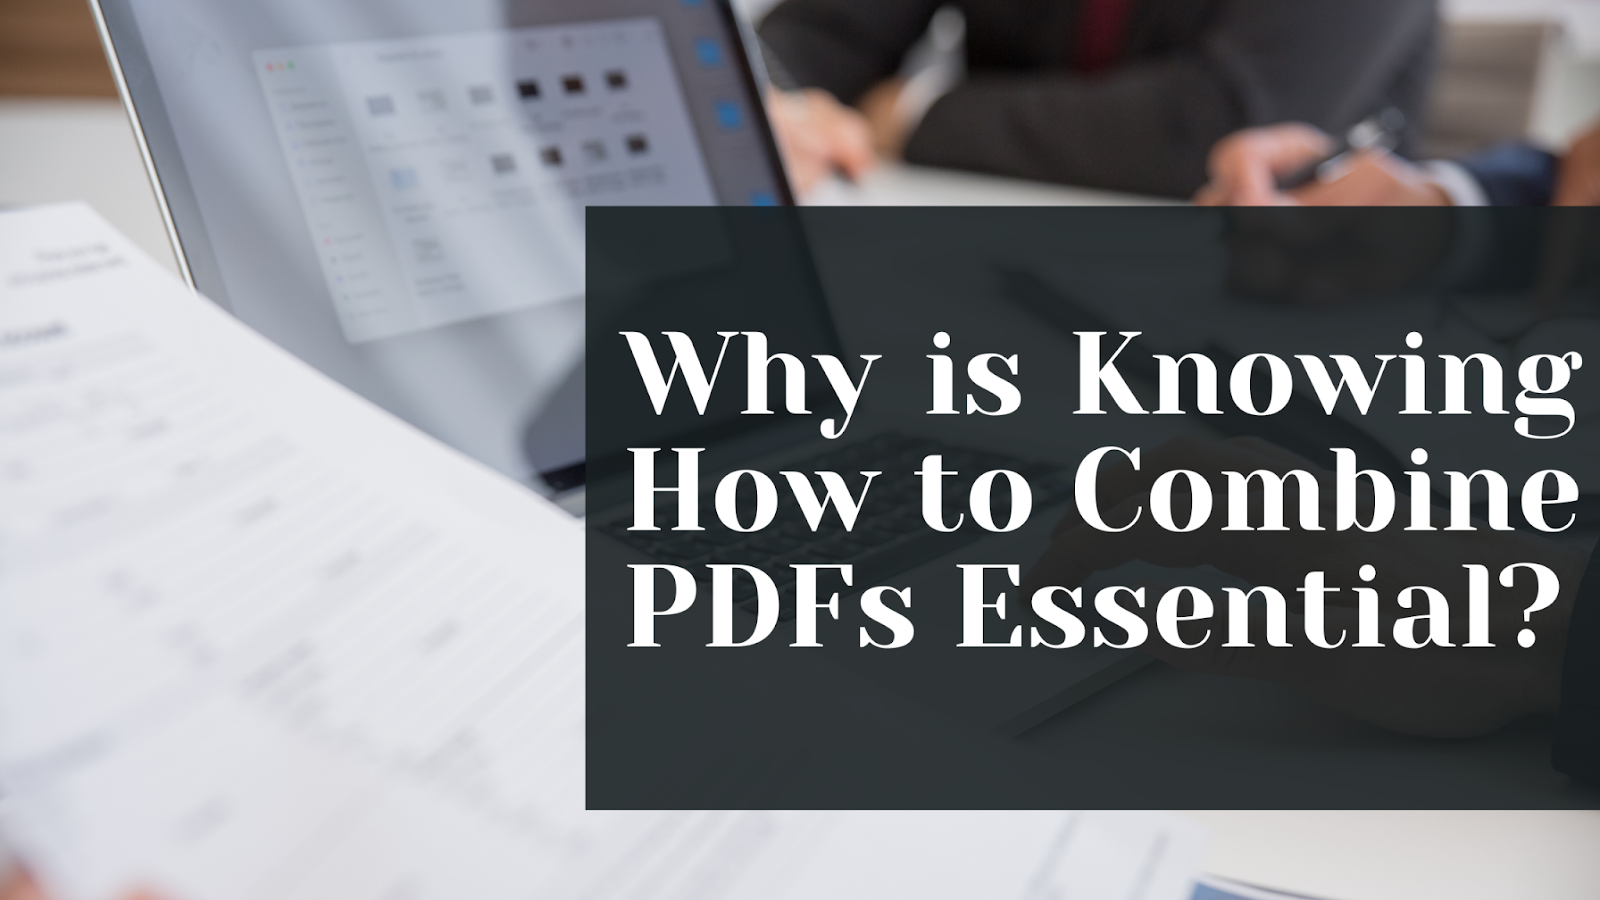 Why is knowing how to combine PDFs essential?